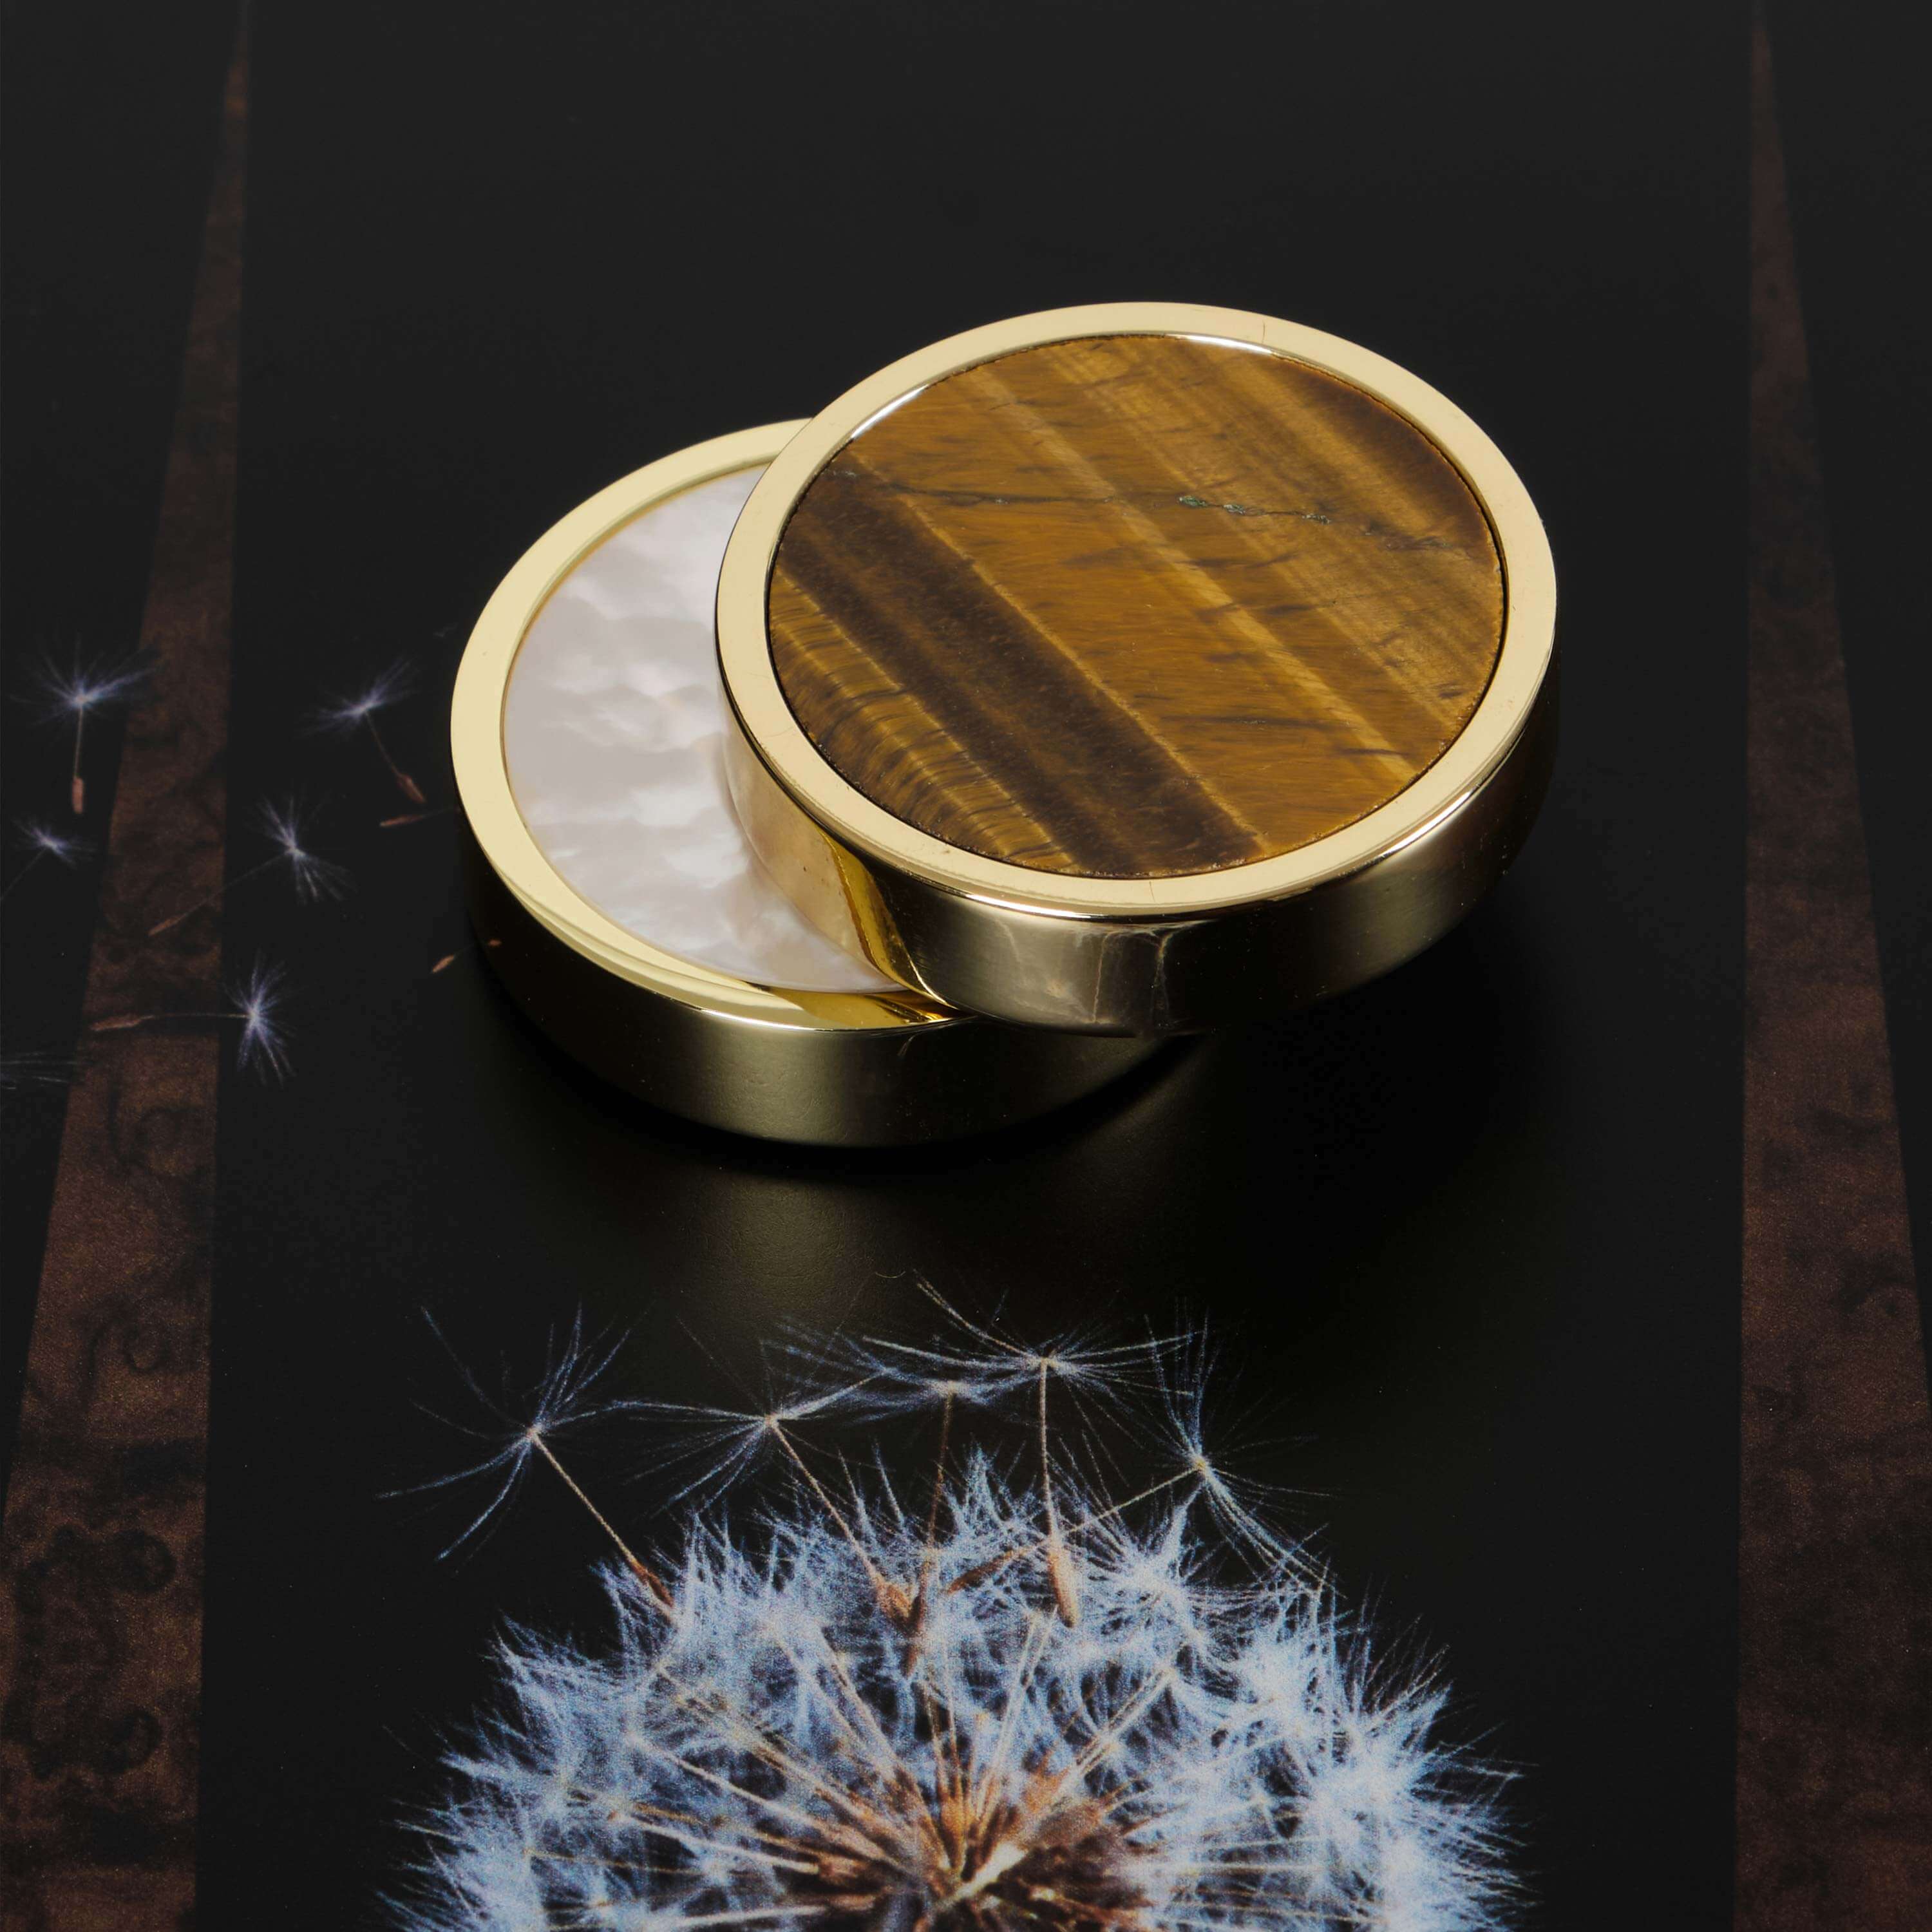 Tiger's Eye and Mother of Pearl playing pieces